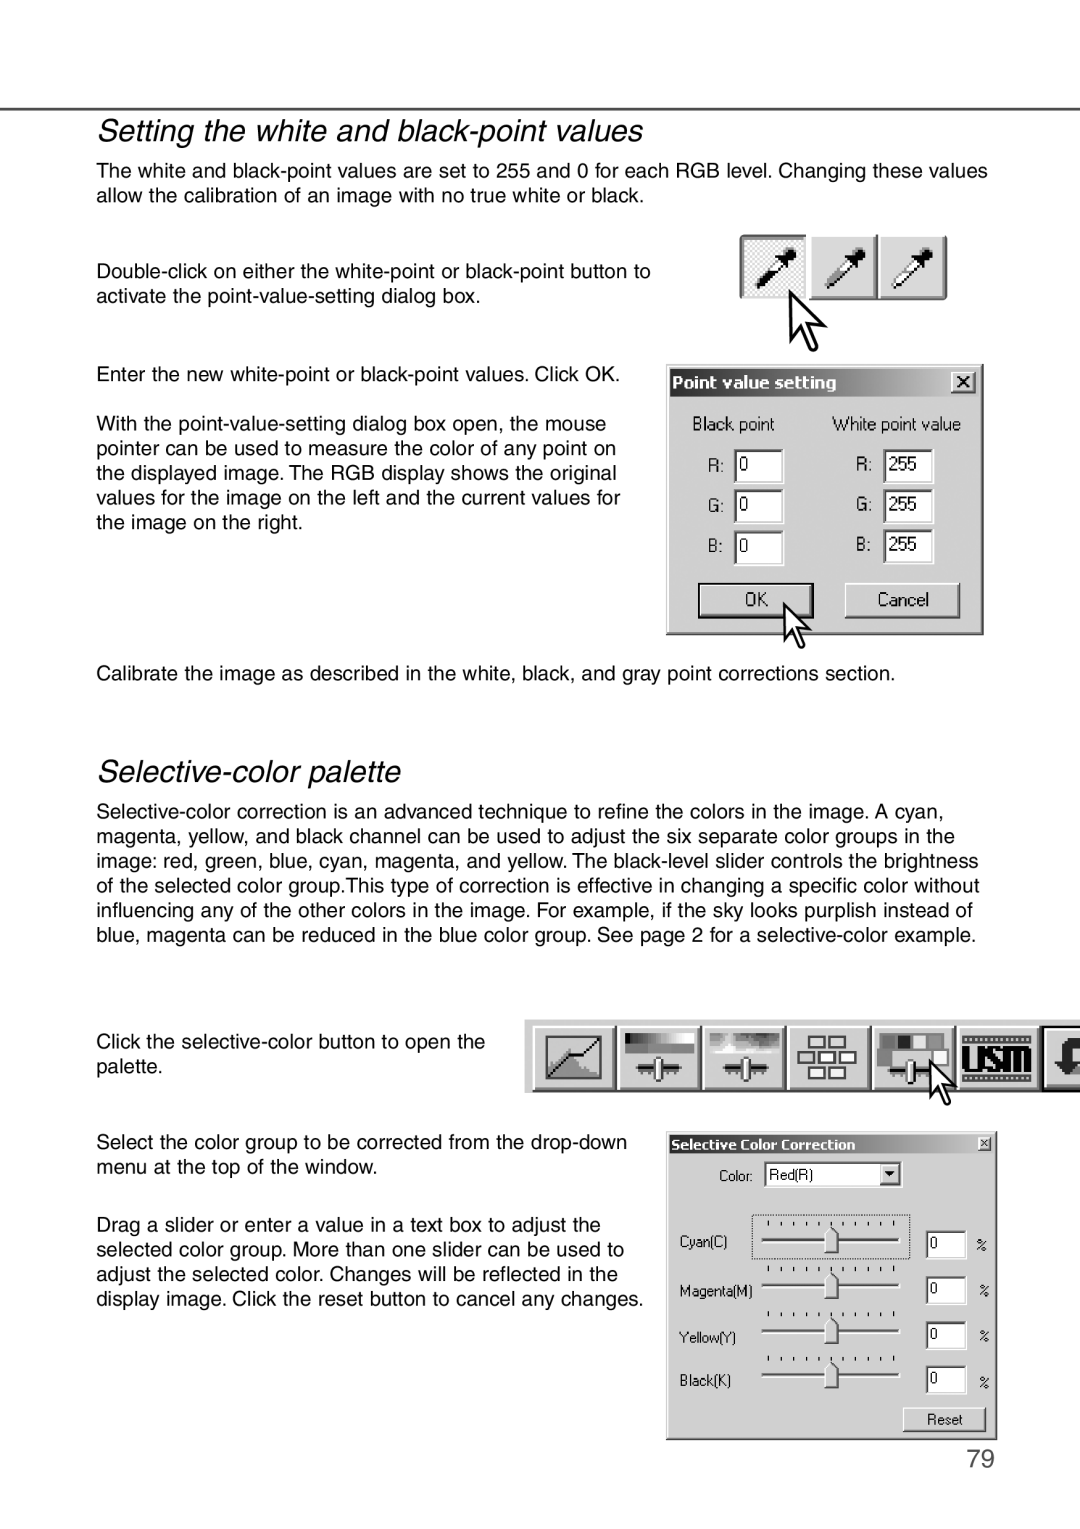 Konica Minolta AF-2840 instruction manual Setting the white and black-pointvalues, Selective-colorpalette 